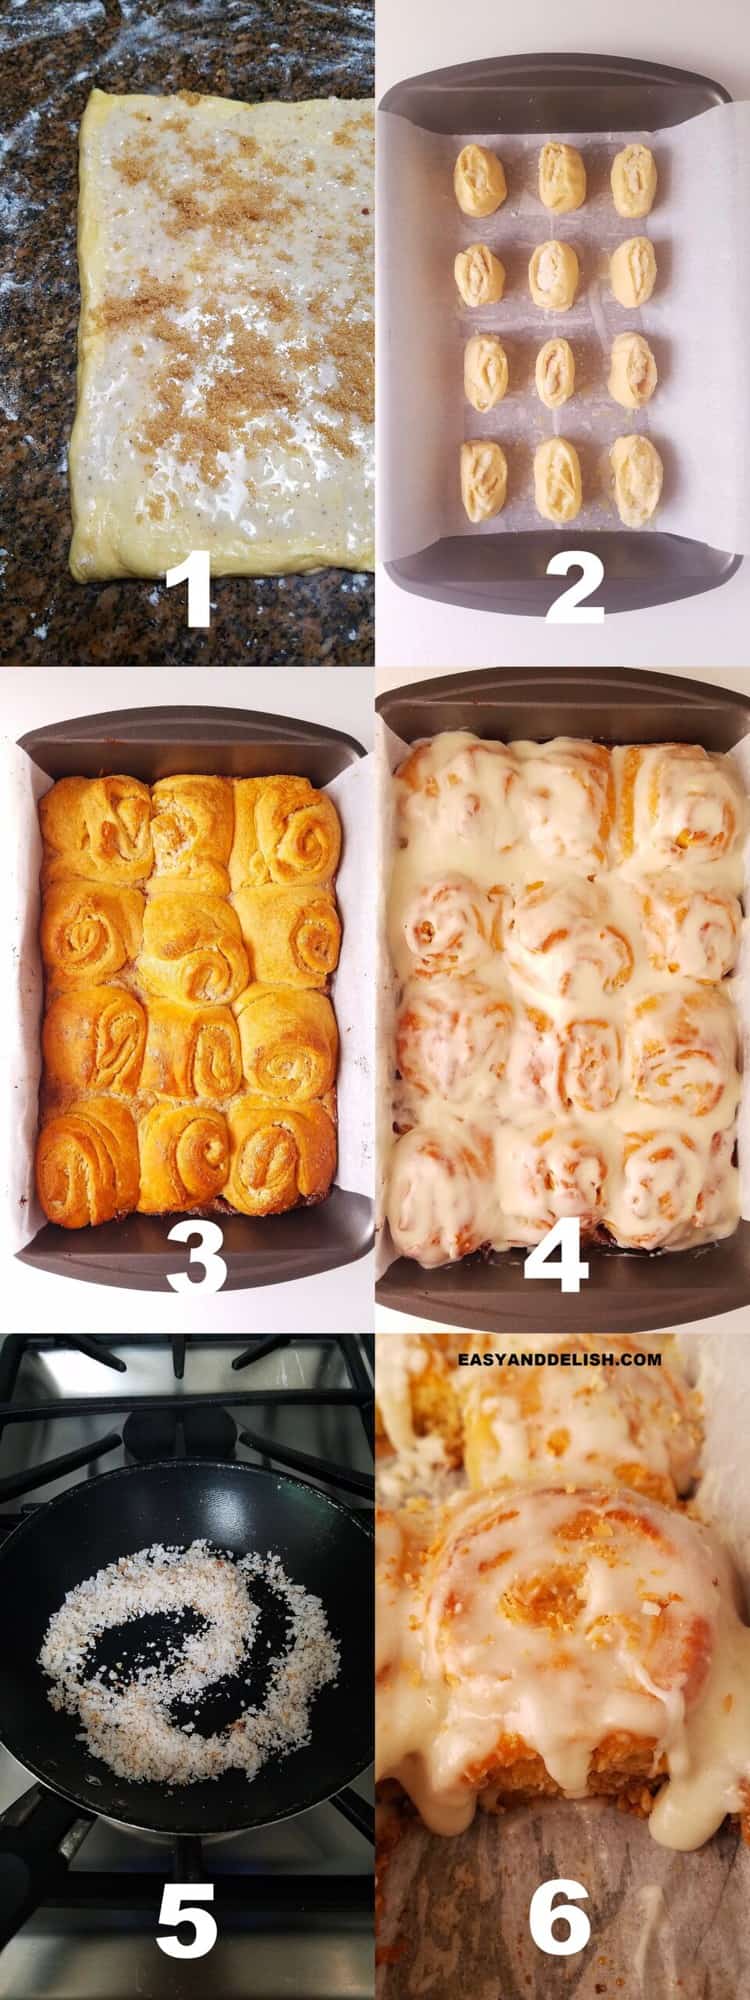 image collage showing how to make coconut rolls in 6 steps